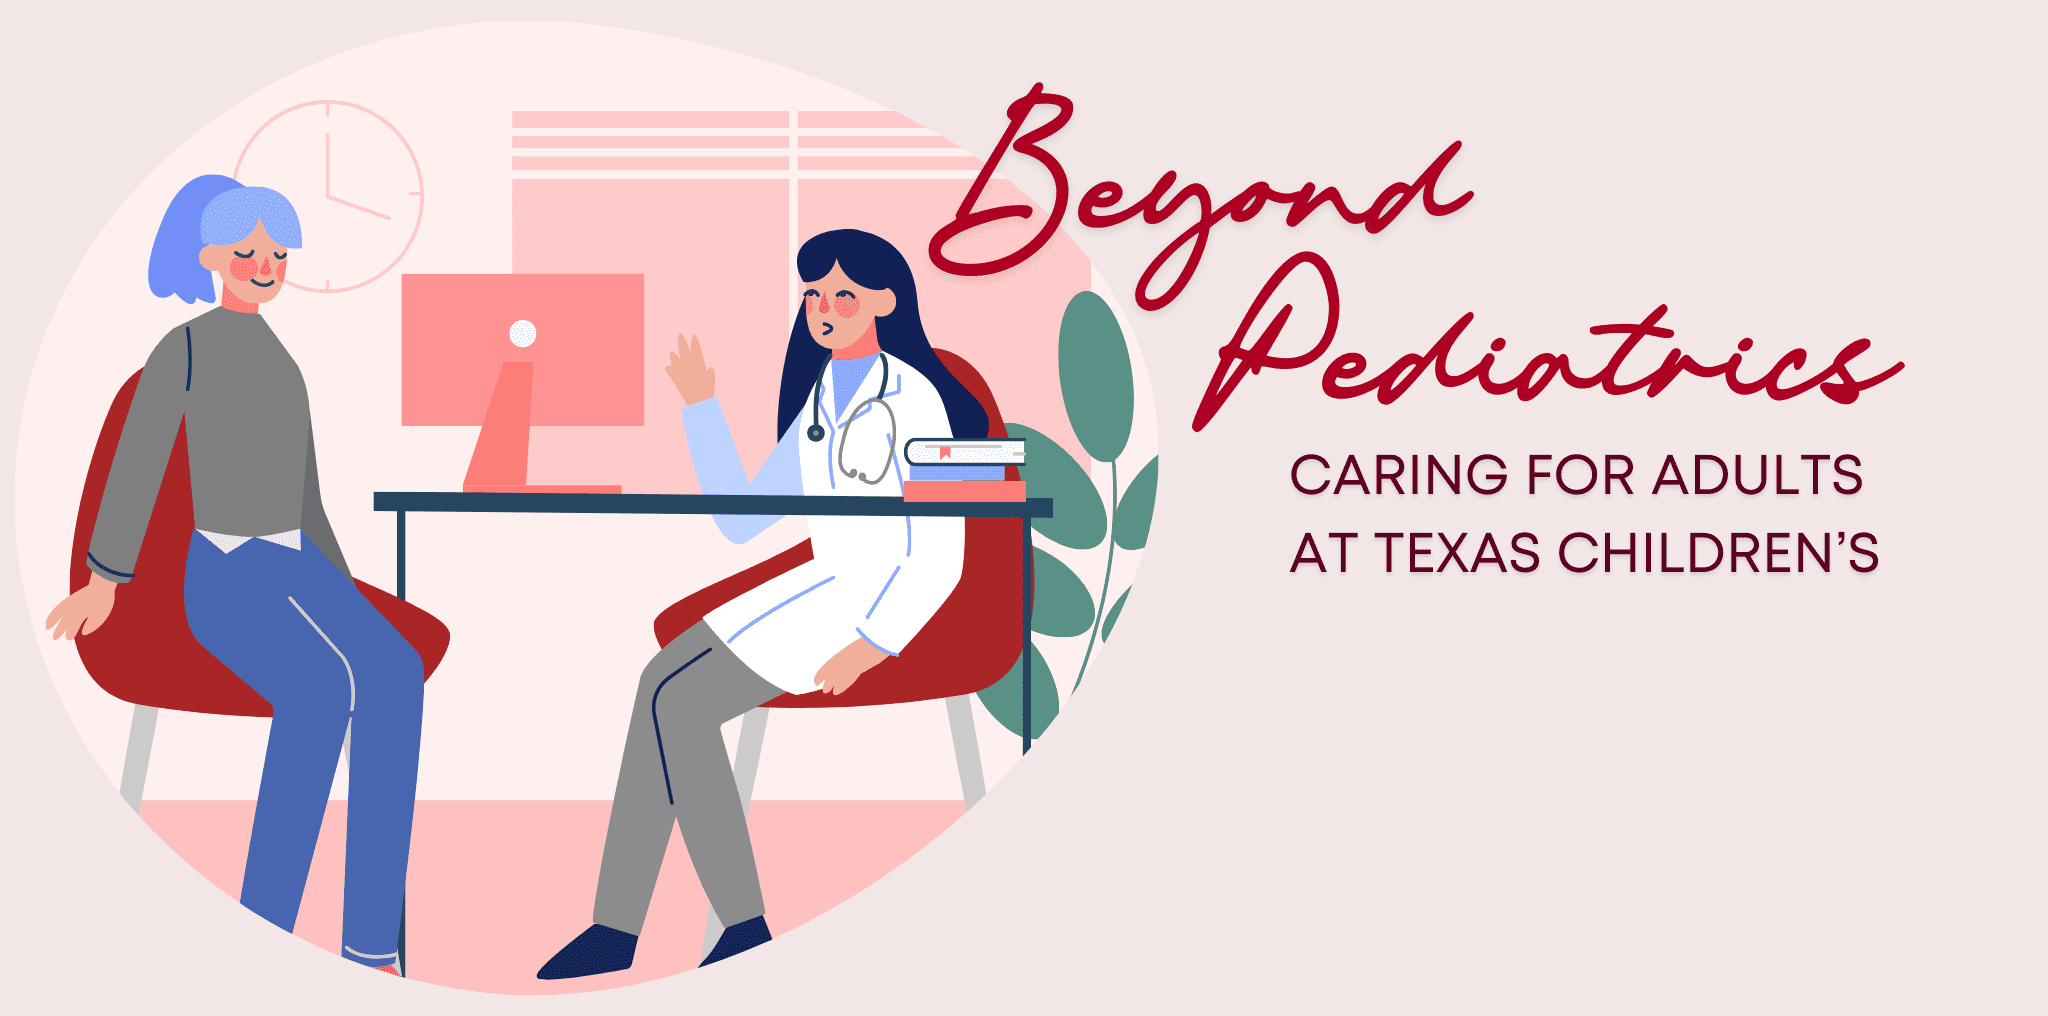 An illustration shows a doctor speaking with an adult patient. The text reads: Beyond Pediatrics, Caring for Adults at Texas Children's